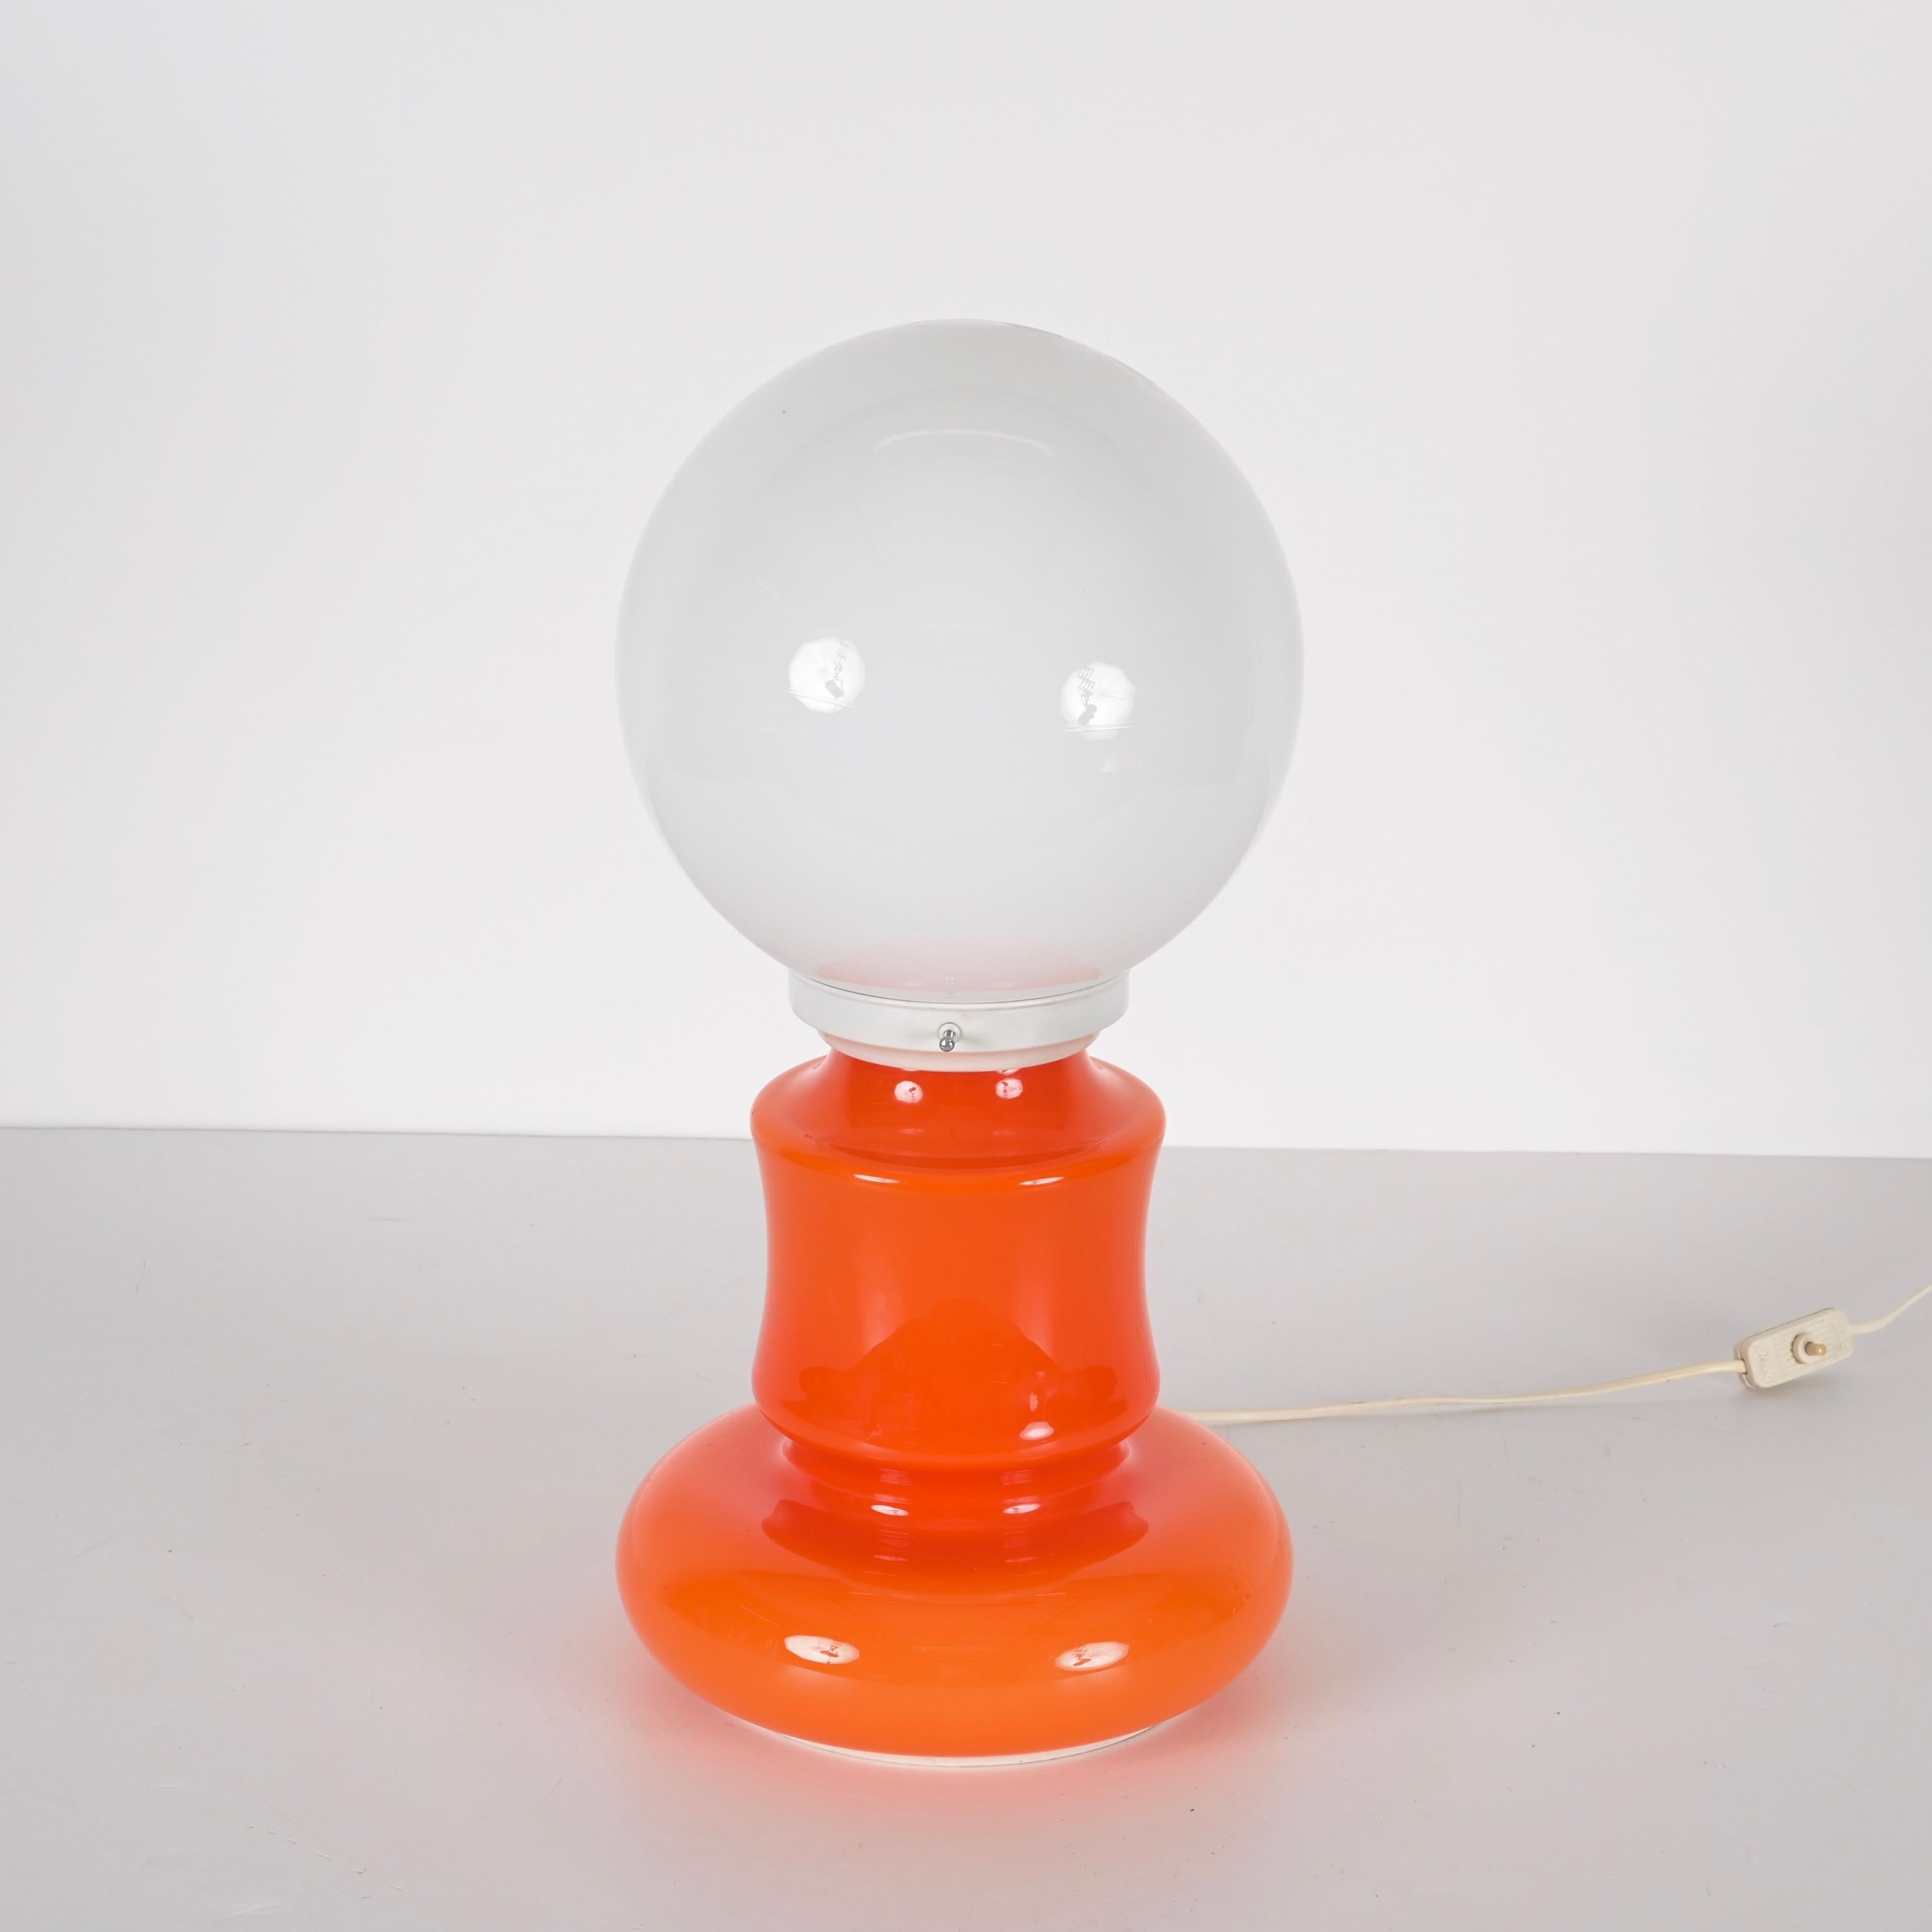 Amazing mid-century space age orange and white Murano glass table lamp. This fantastic piece was designed in Venice, Italy, during the 1970s.

This item is astonishing as the artistic Murano glass is used for the bulb cover and the lamp's